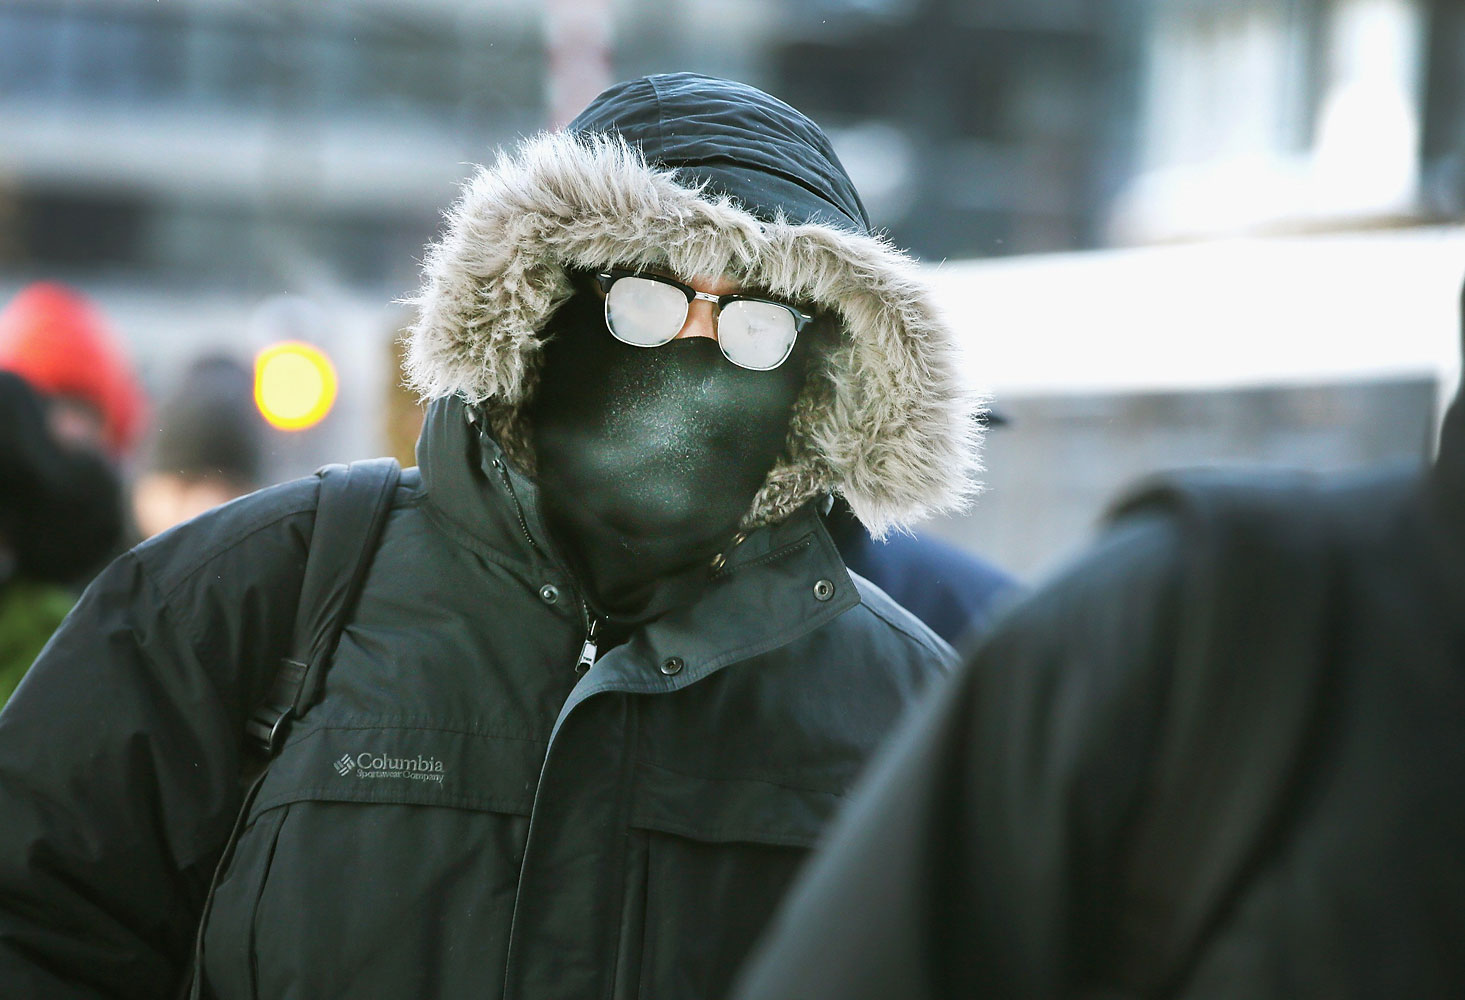 Commuters make a sub-zero trek to offices in the Loop on Jan. 6, 2014 in Chicago, Ill. (Scott Olson / Getty Images)